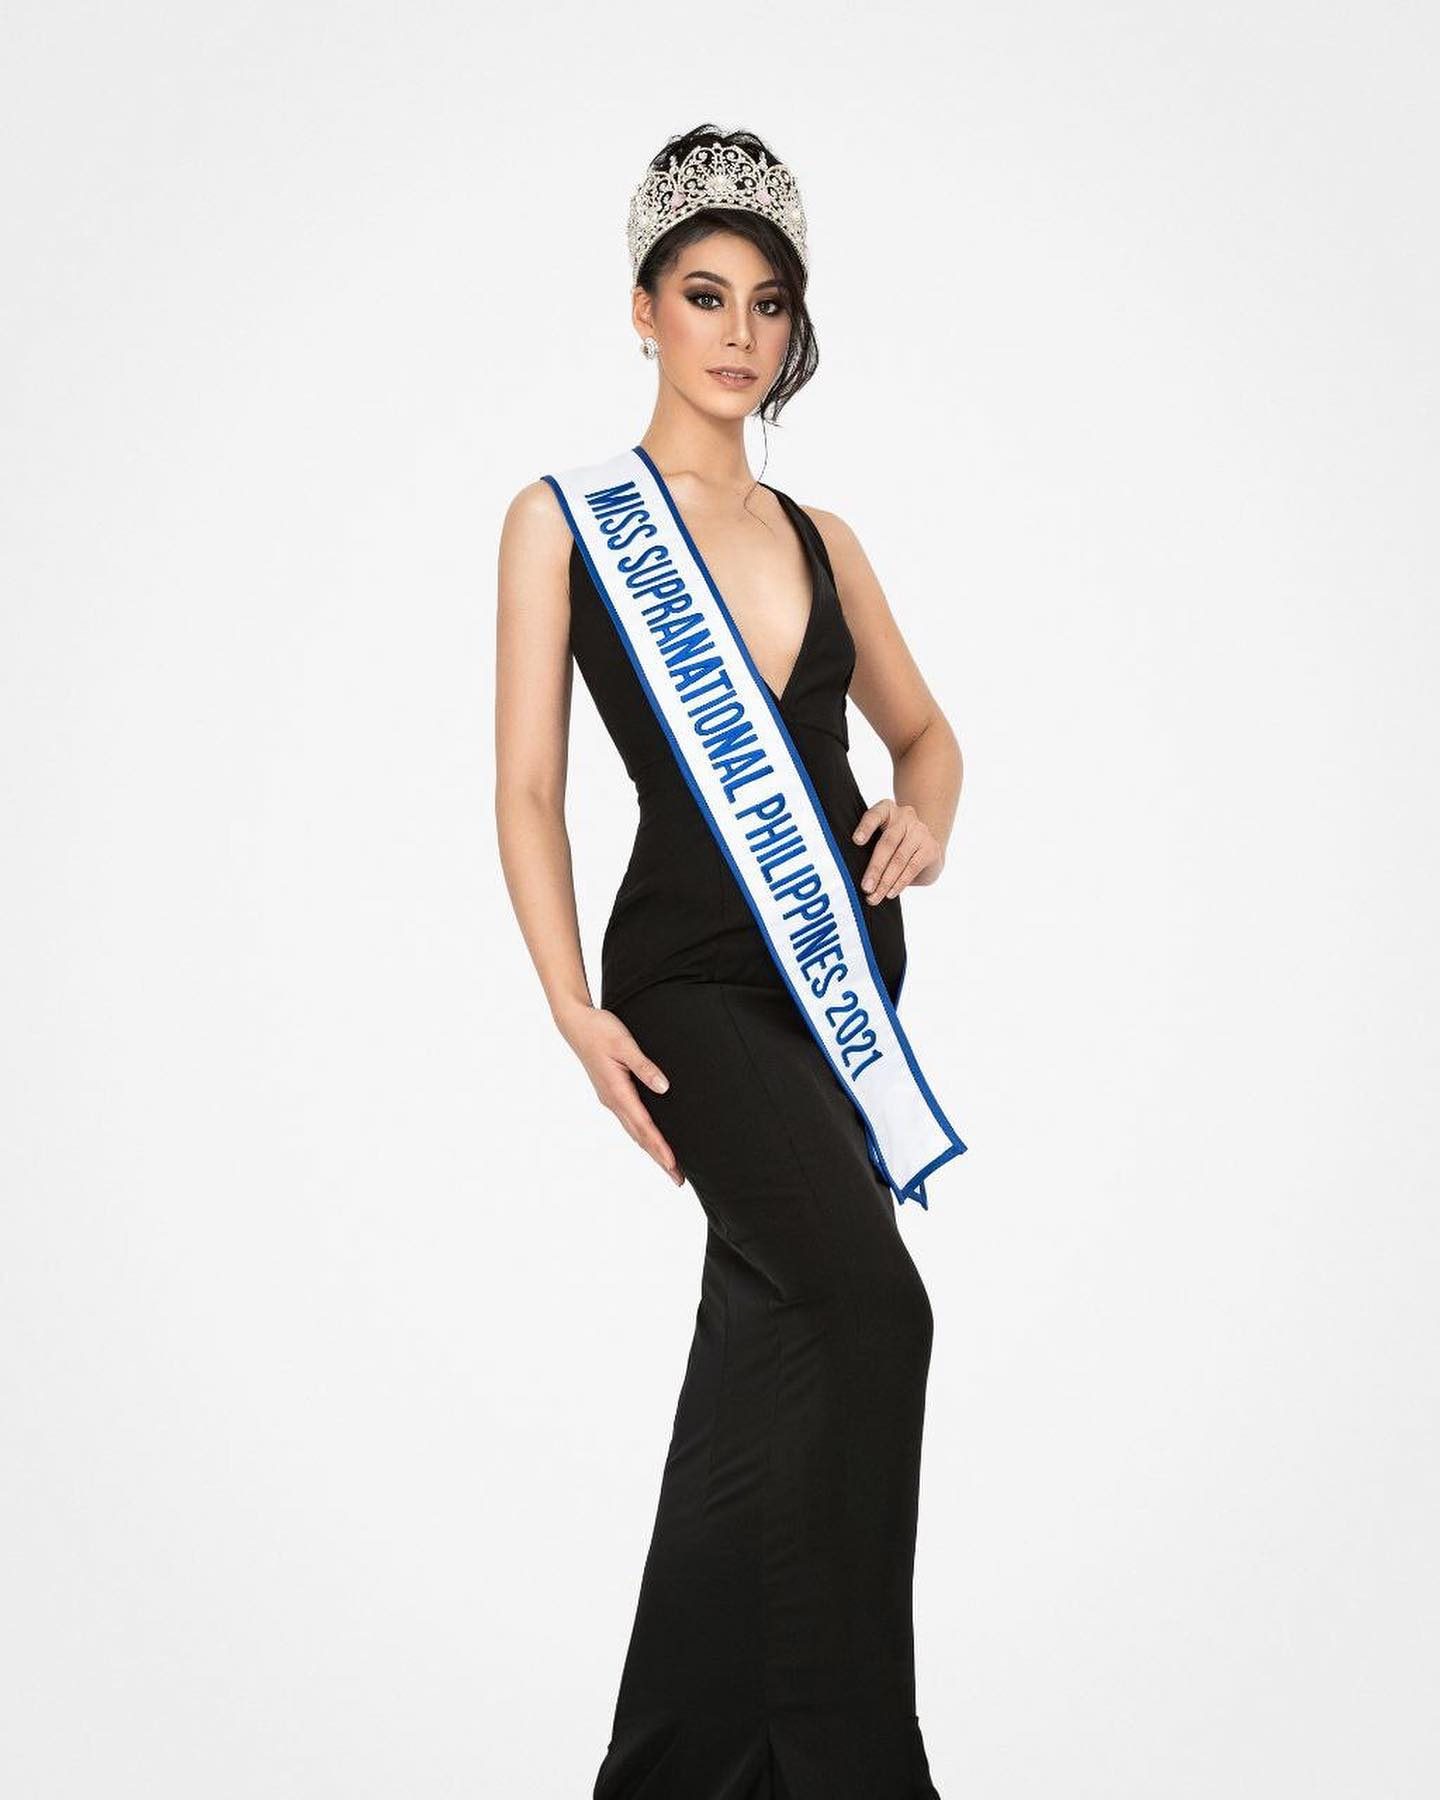 Dindi Pajares heads to Poland for Miss Supranational 2021